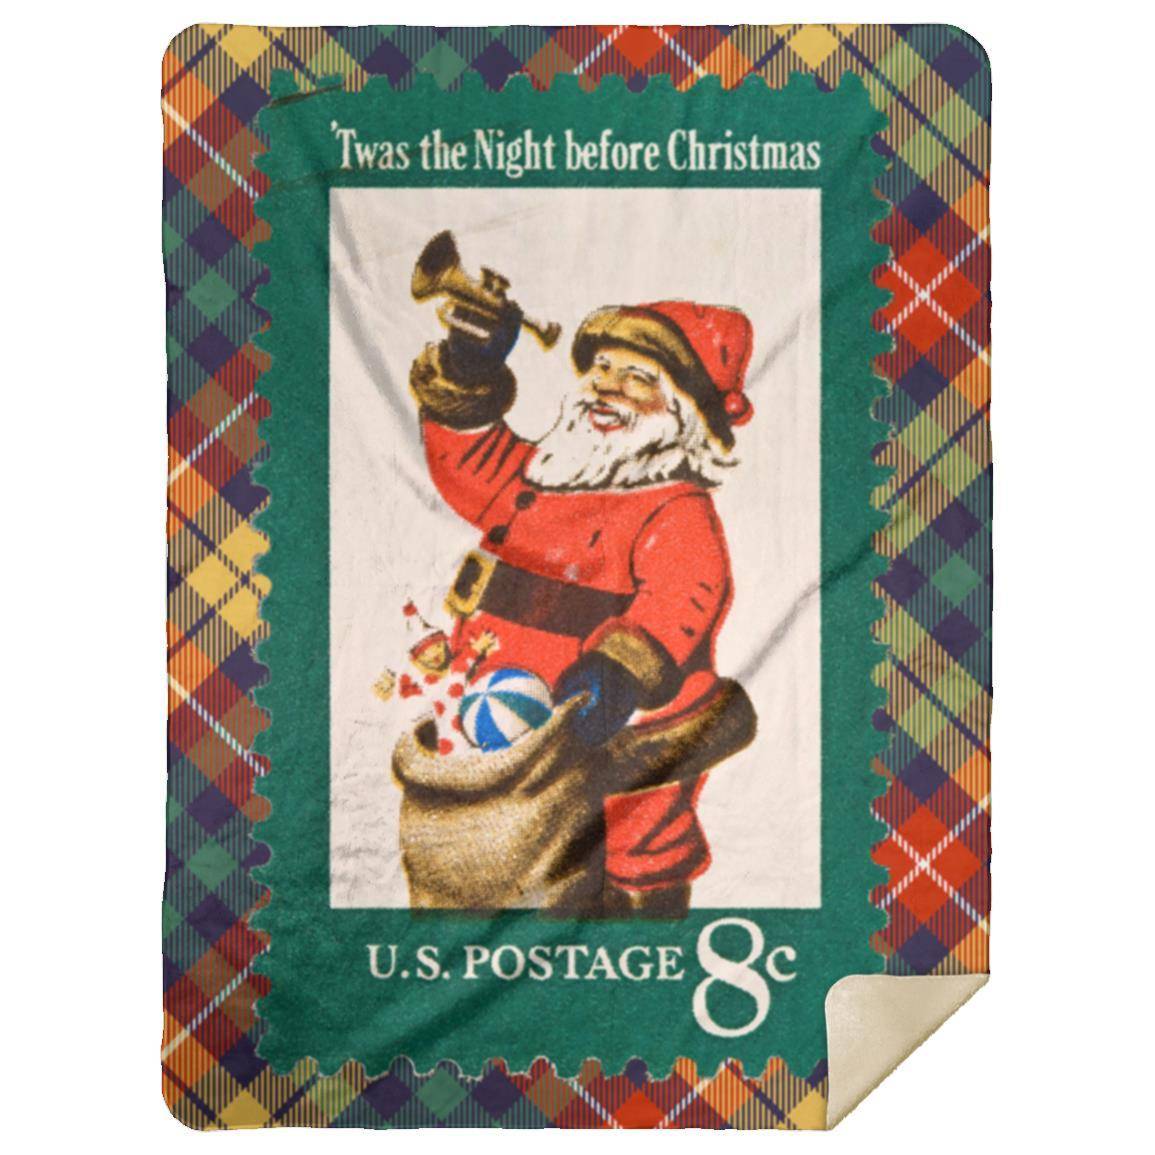 Vintage Christmas Stamp (circa 1972) Blanket on Multi-color Plaid Background. Comes in 30x40 inch (Baby Blanket), 50x60 inch (Throw) or 60x80 inch (Queen). Premium Silky Smooth front; Premium Fluffy Sherpa back side; Thickness: 1 cm Full color all over print; Prints edge to edge on one side. Machine wash separately in cold water; Tumble dry on low heat. Do not iron or press with heat; Do not dry clean. Decoration Type: Sublimation; Product Measurement Tolerance: +/- 1 inch